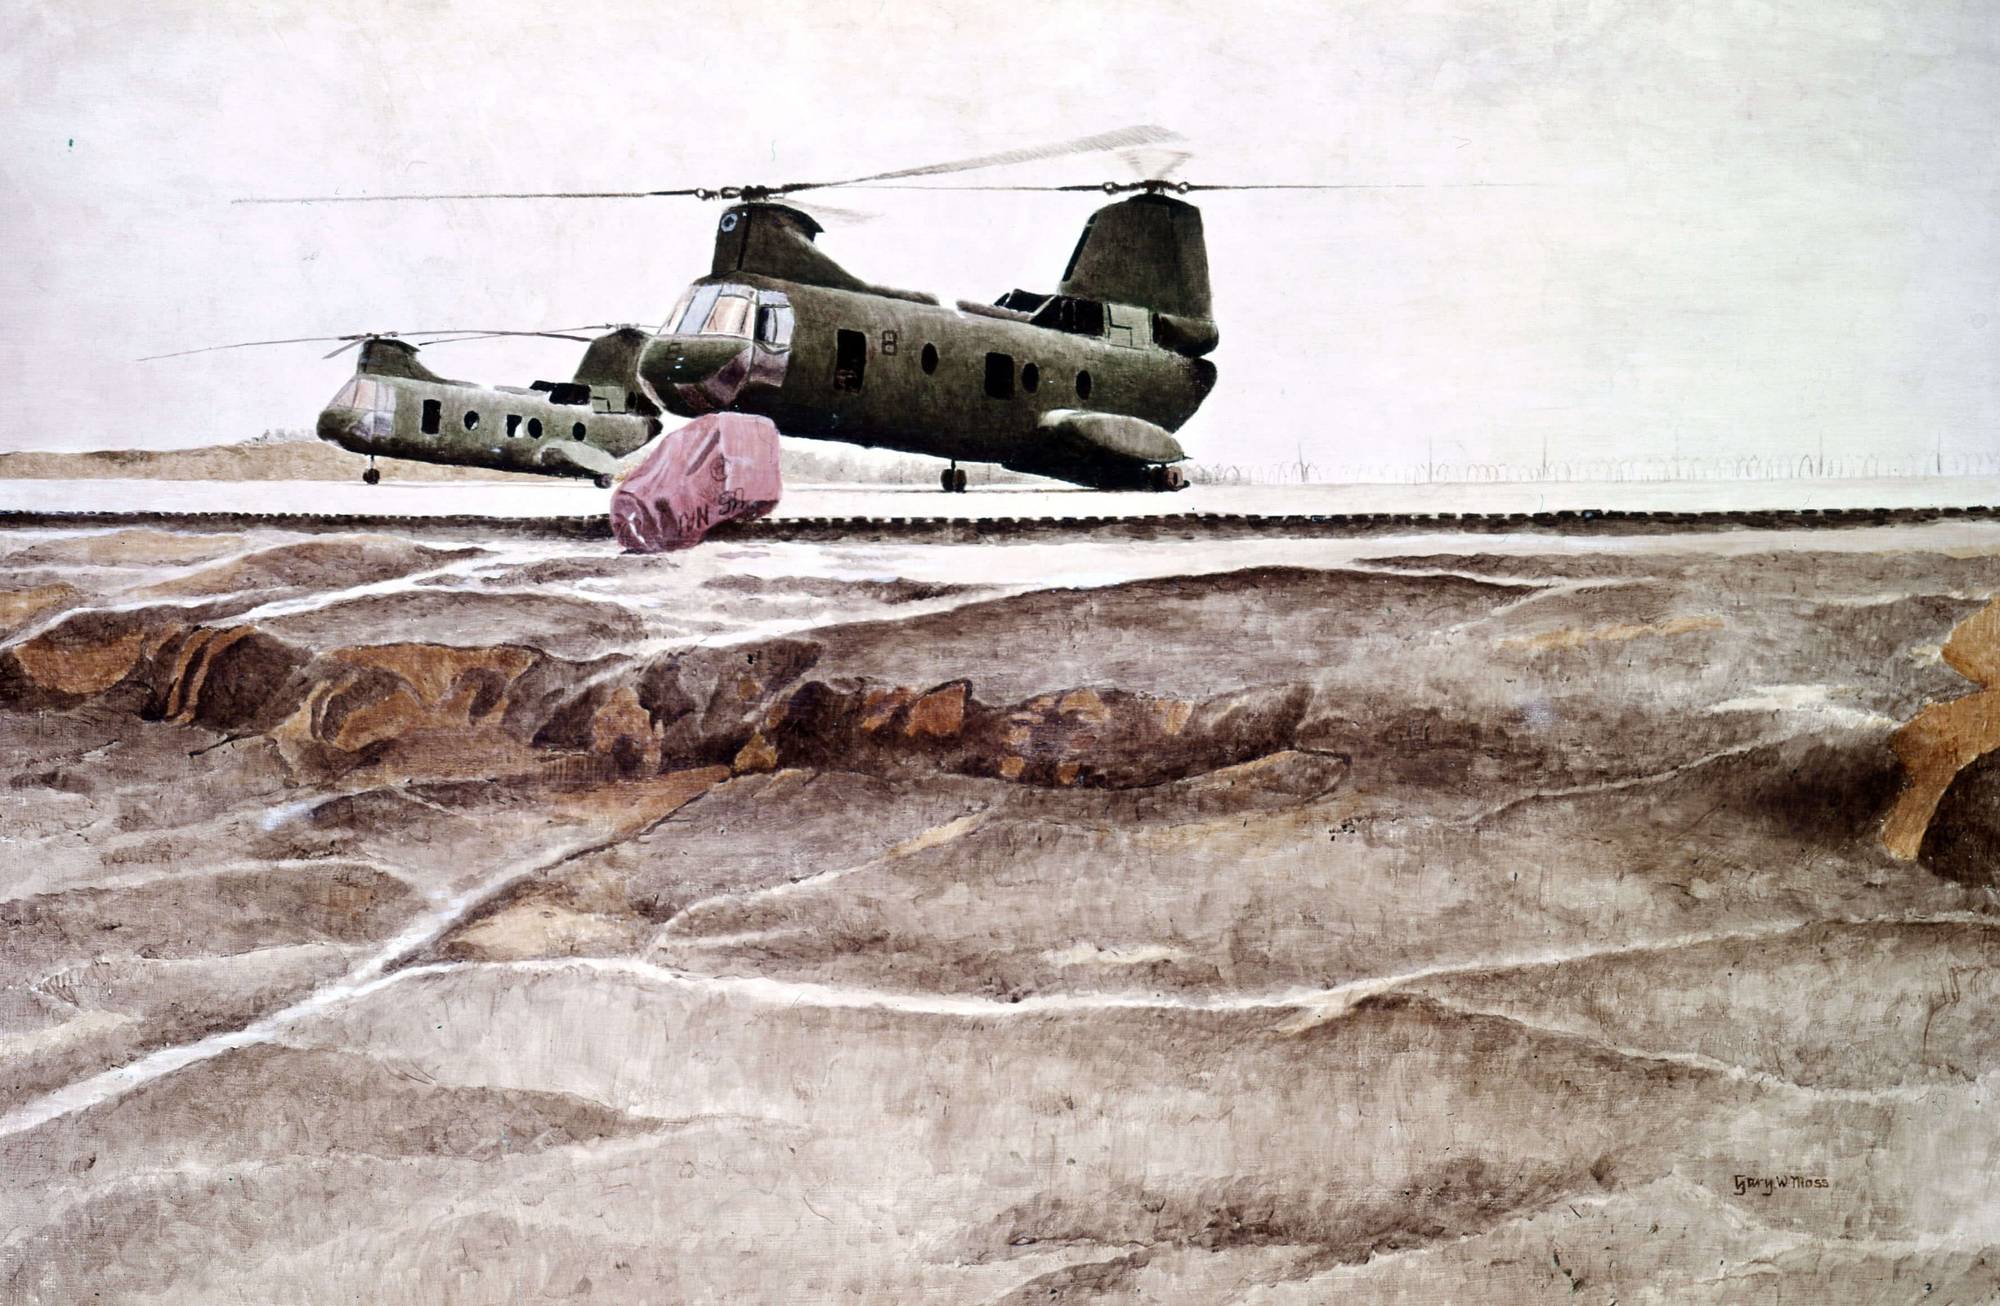 Artistic rendering of two Chinook helicopters on the ground on a dirt expanse.